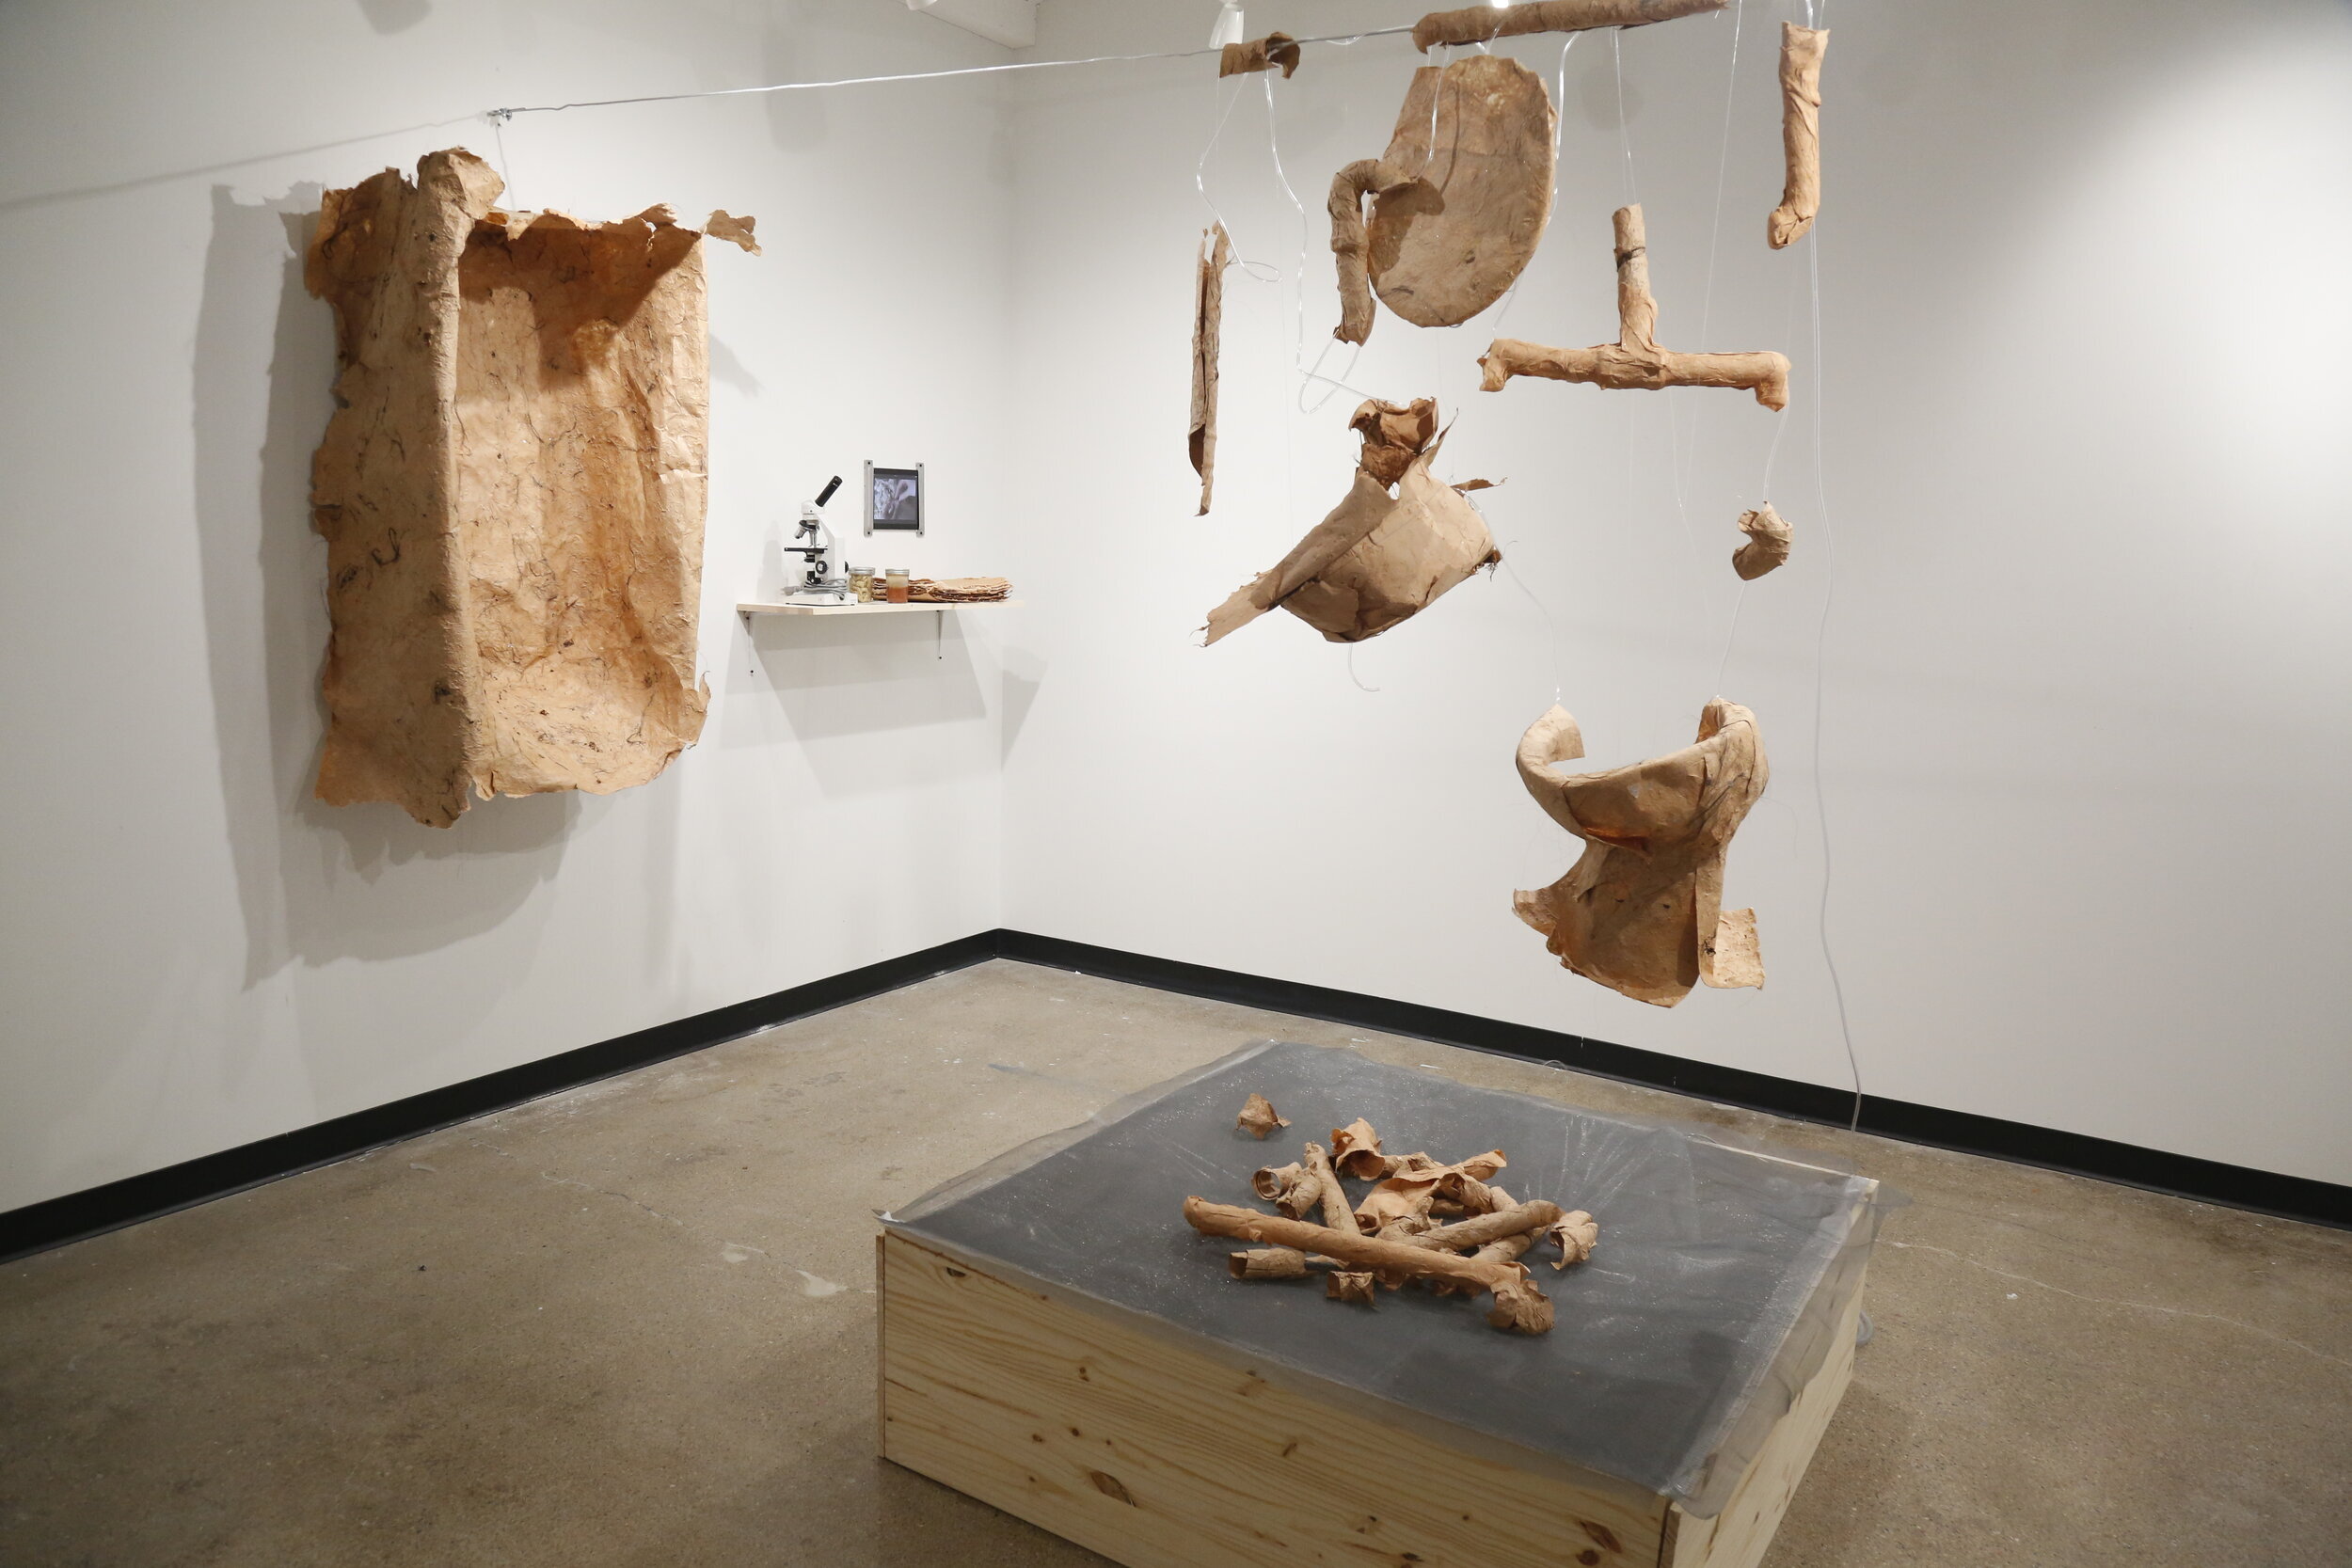   MFA in Book &amp; Paper alumna, Selena Ingram’s thesis work, The Fragile Morphologies of Pulp Bodies, made in handmade paper cast in her apartment bathroom.  